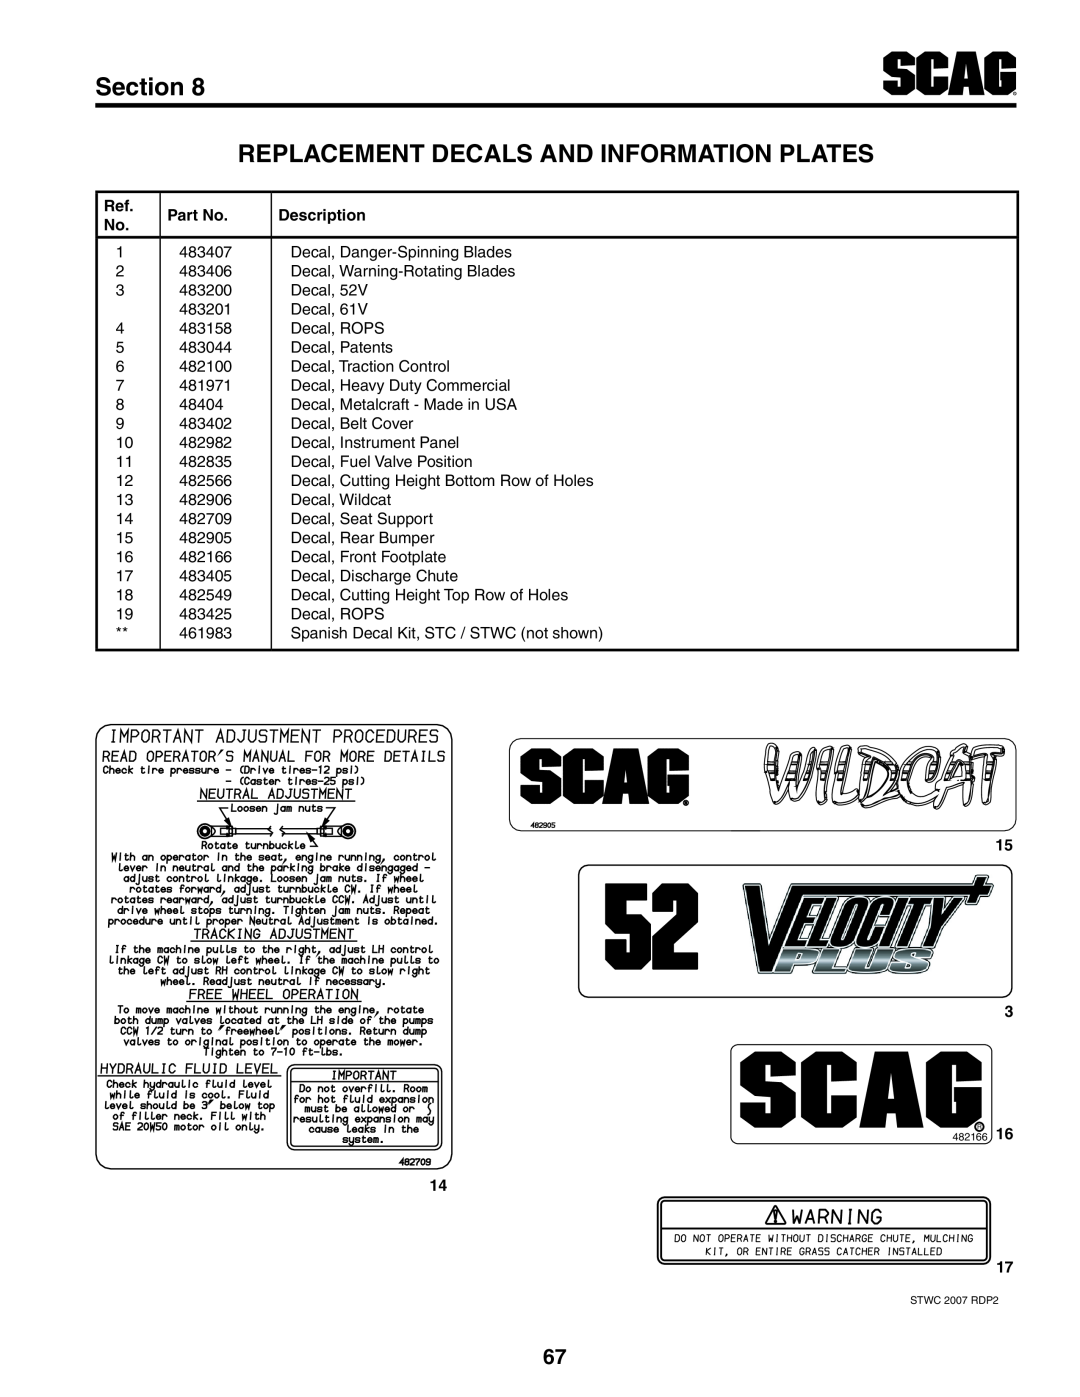 Scag Power Equipment STWC61V-26KA-LC manual Section REPLACEMENT DECALS AND INFORMATION PLATES, 482166R, STWC 2007 RDP2 